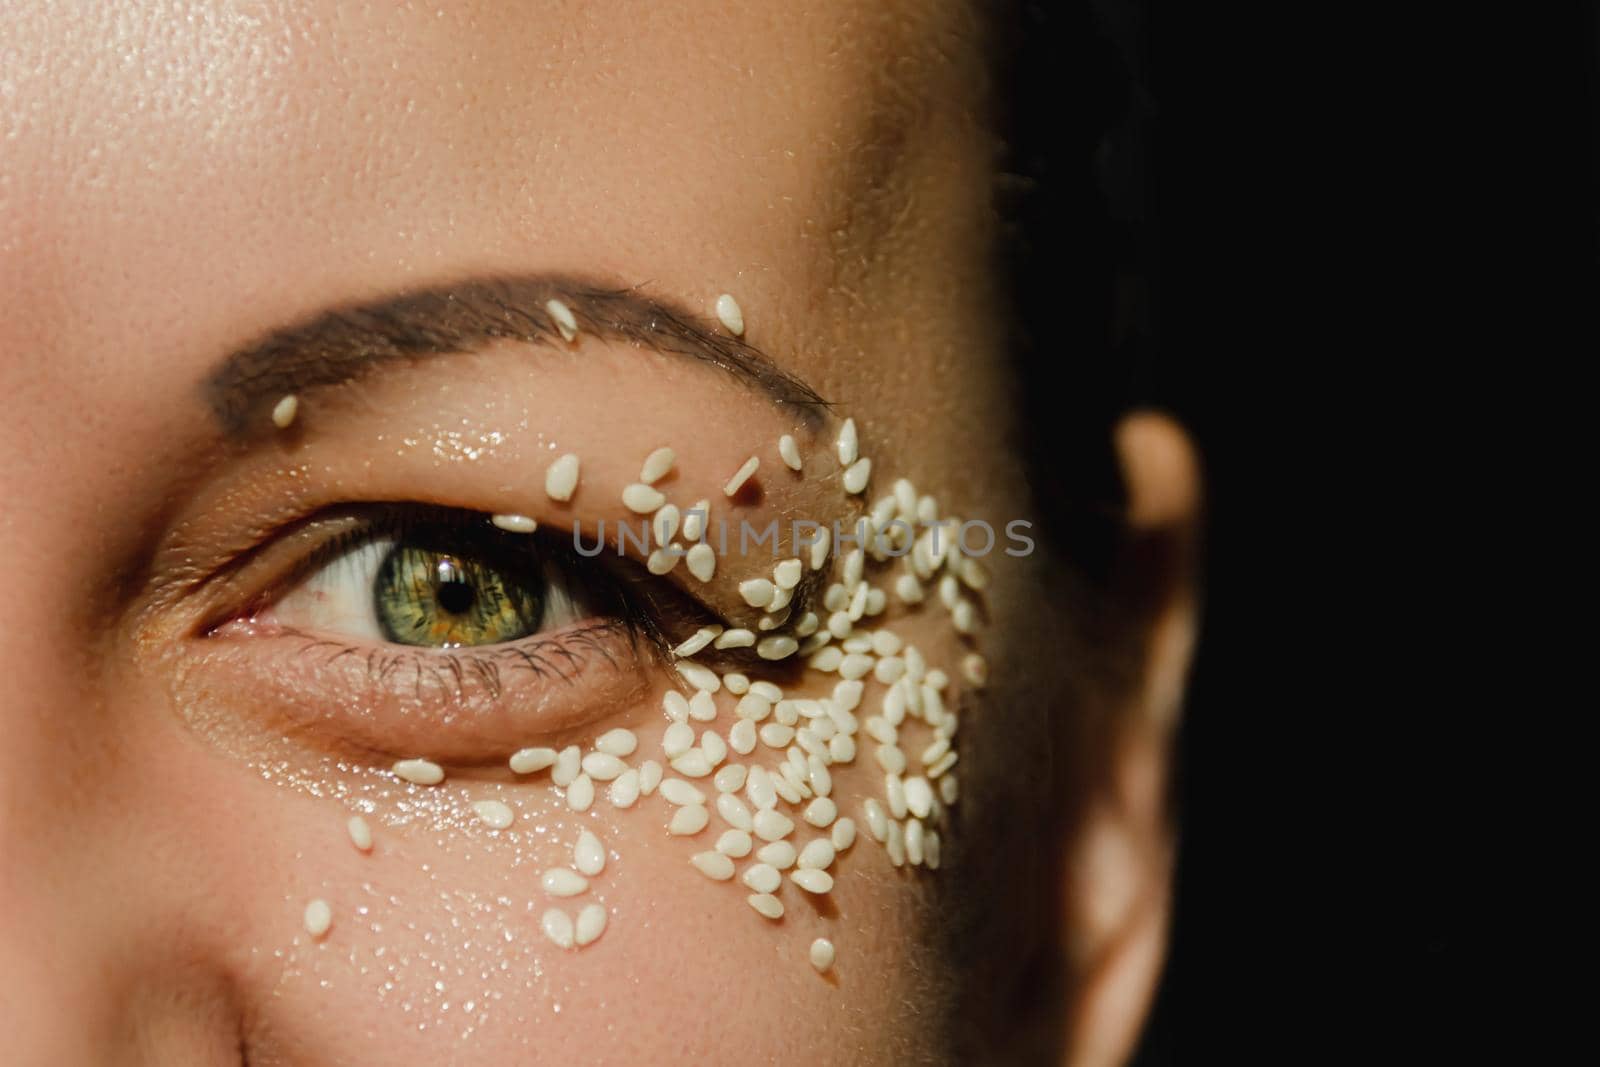 Open, green eye of a woman with white sesame seeds on the eyelid, around the eye. Expressive look